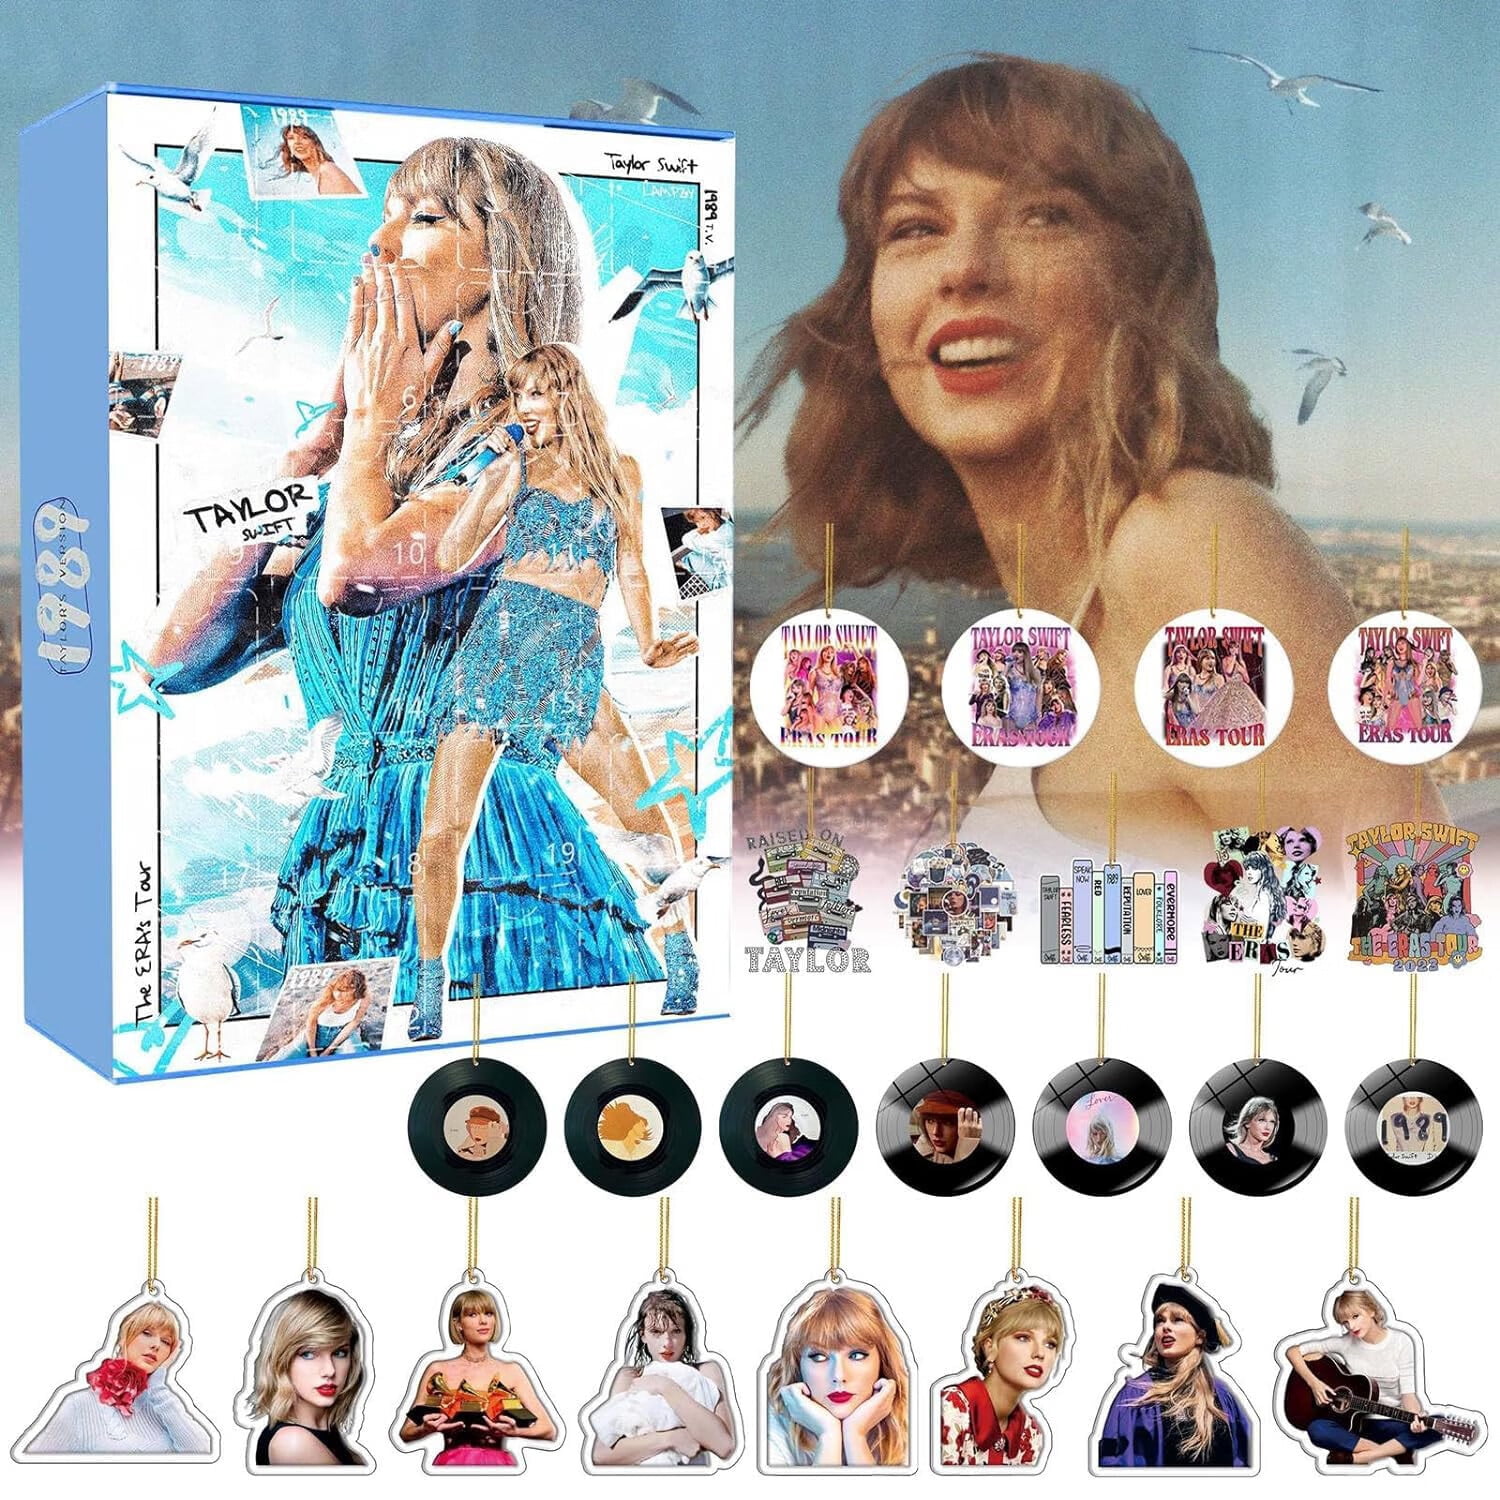 Taylor The Swift 1989 Christmas Advent Calendar Contains 24 Gifts